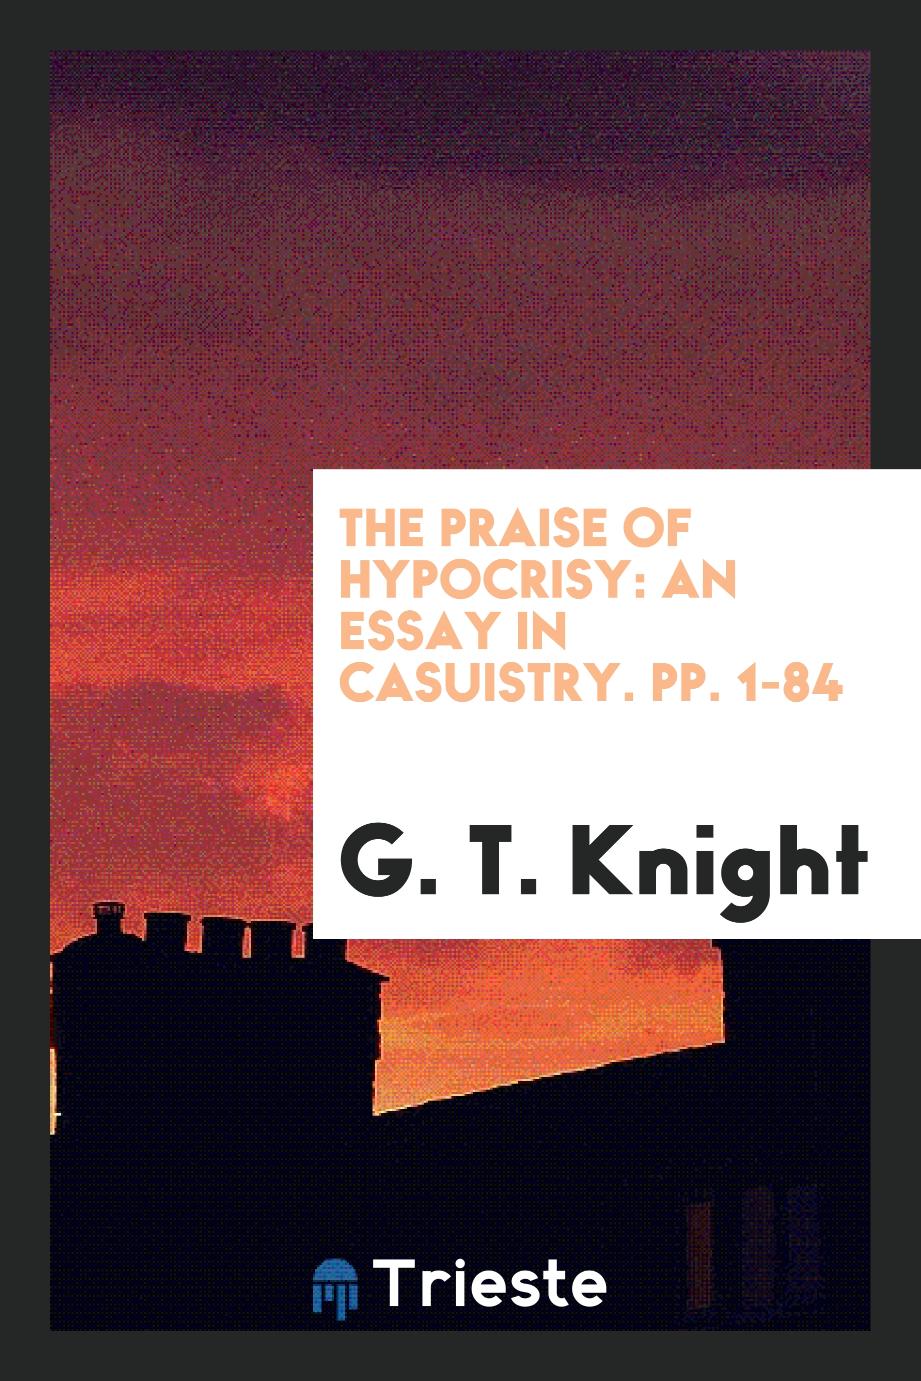 The Praise of Hypocrisy: An Essay in Casuistry. pp. 1-84